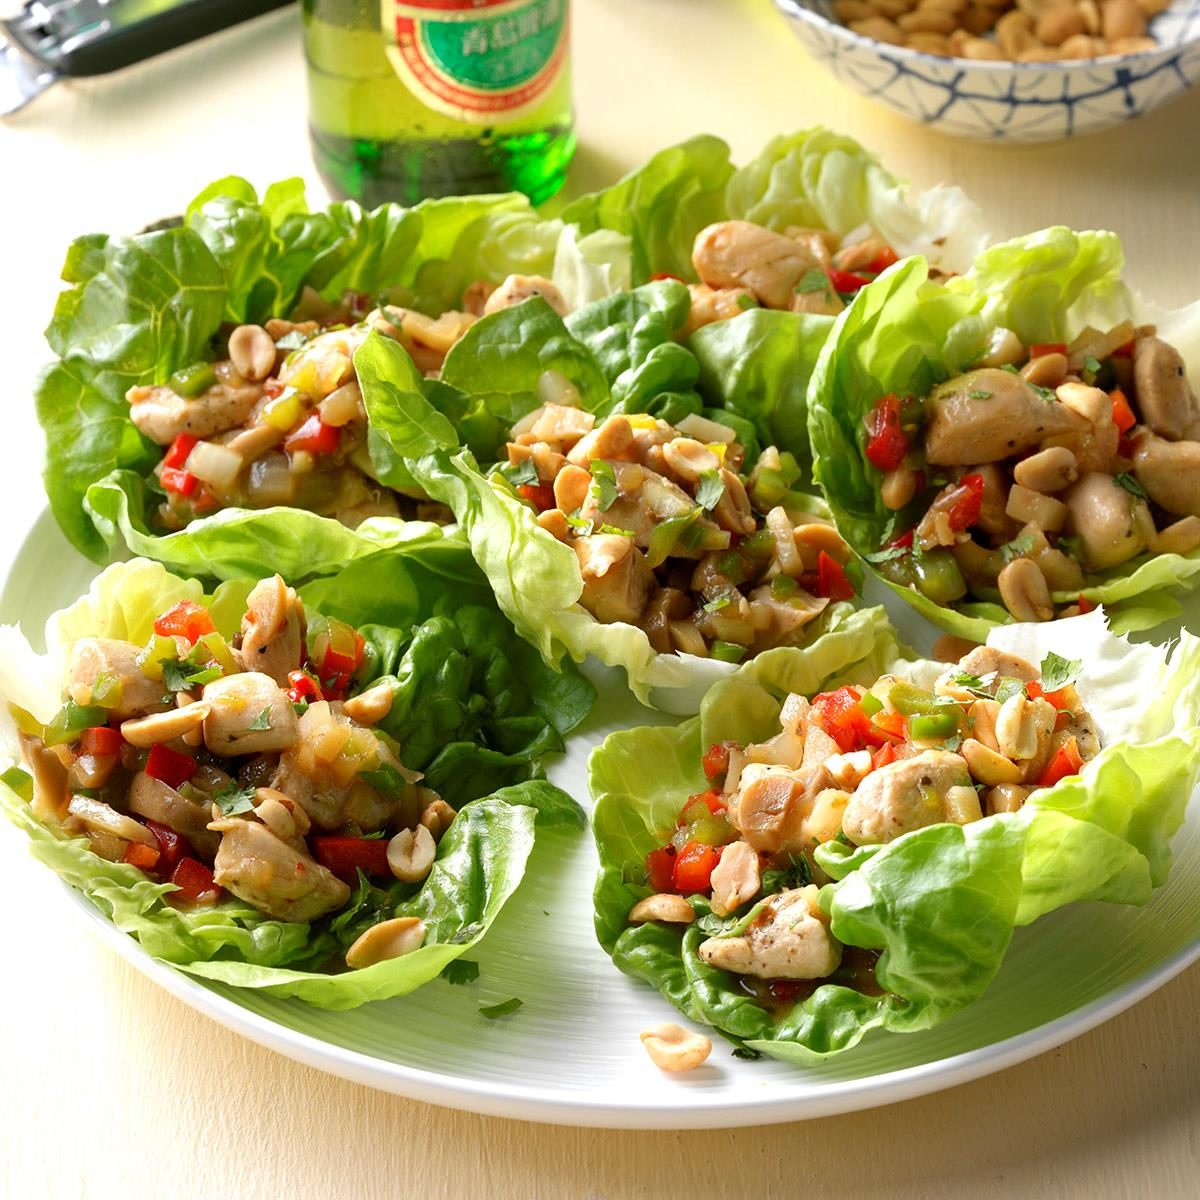 Inspired by: P.F. Chang's Lettuce Wraps